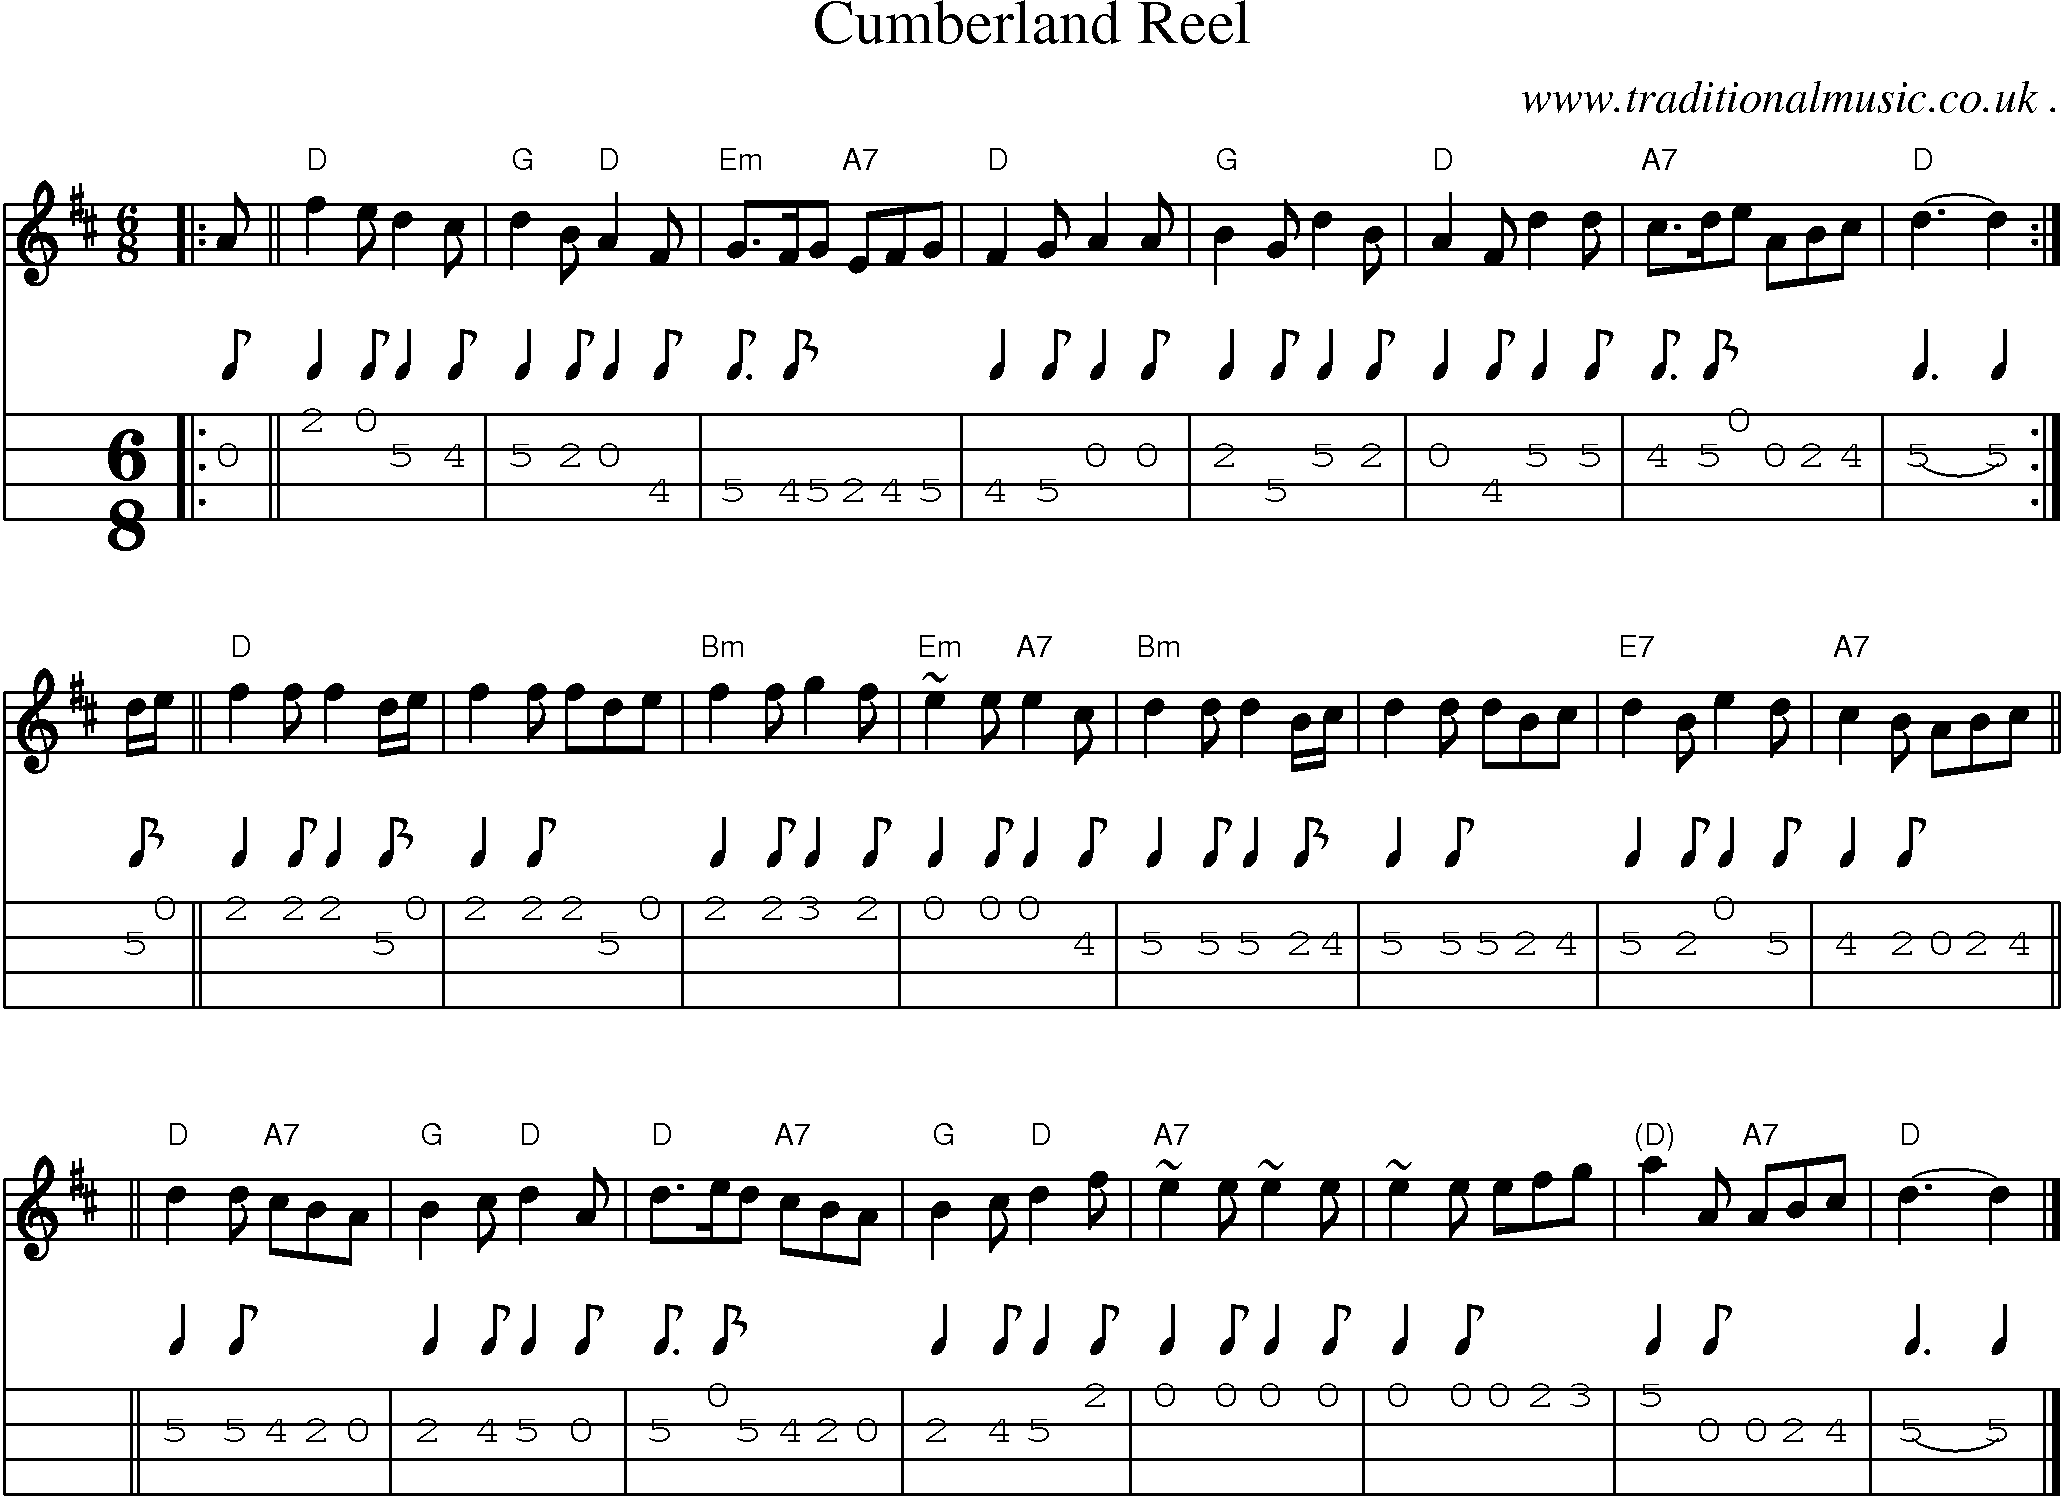 Sheet-music  score, Chords and Mandolin Tabs for Cumberland Reel